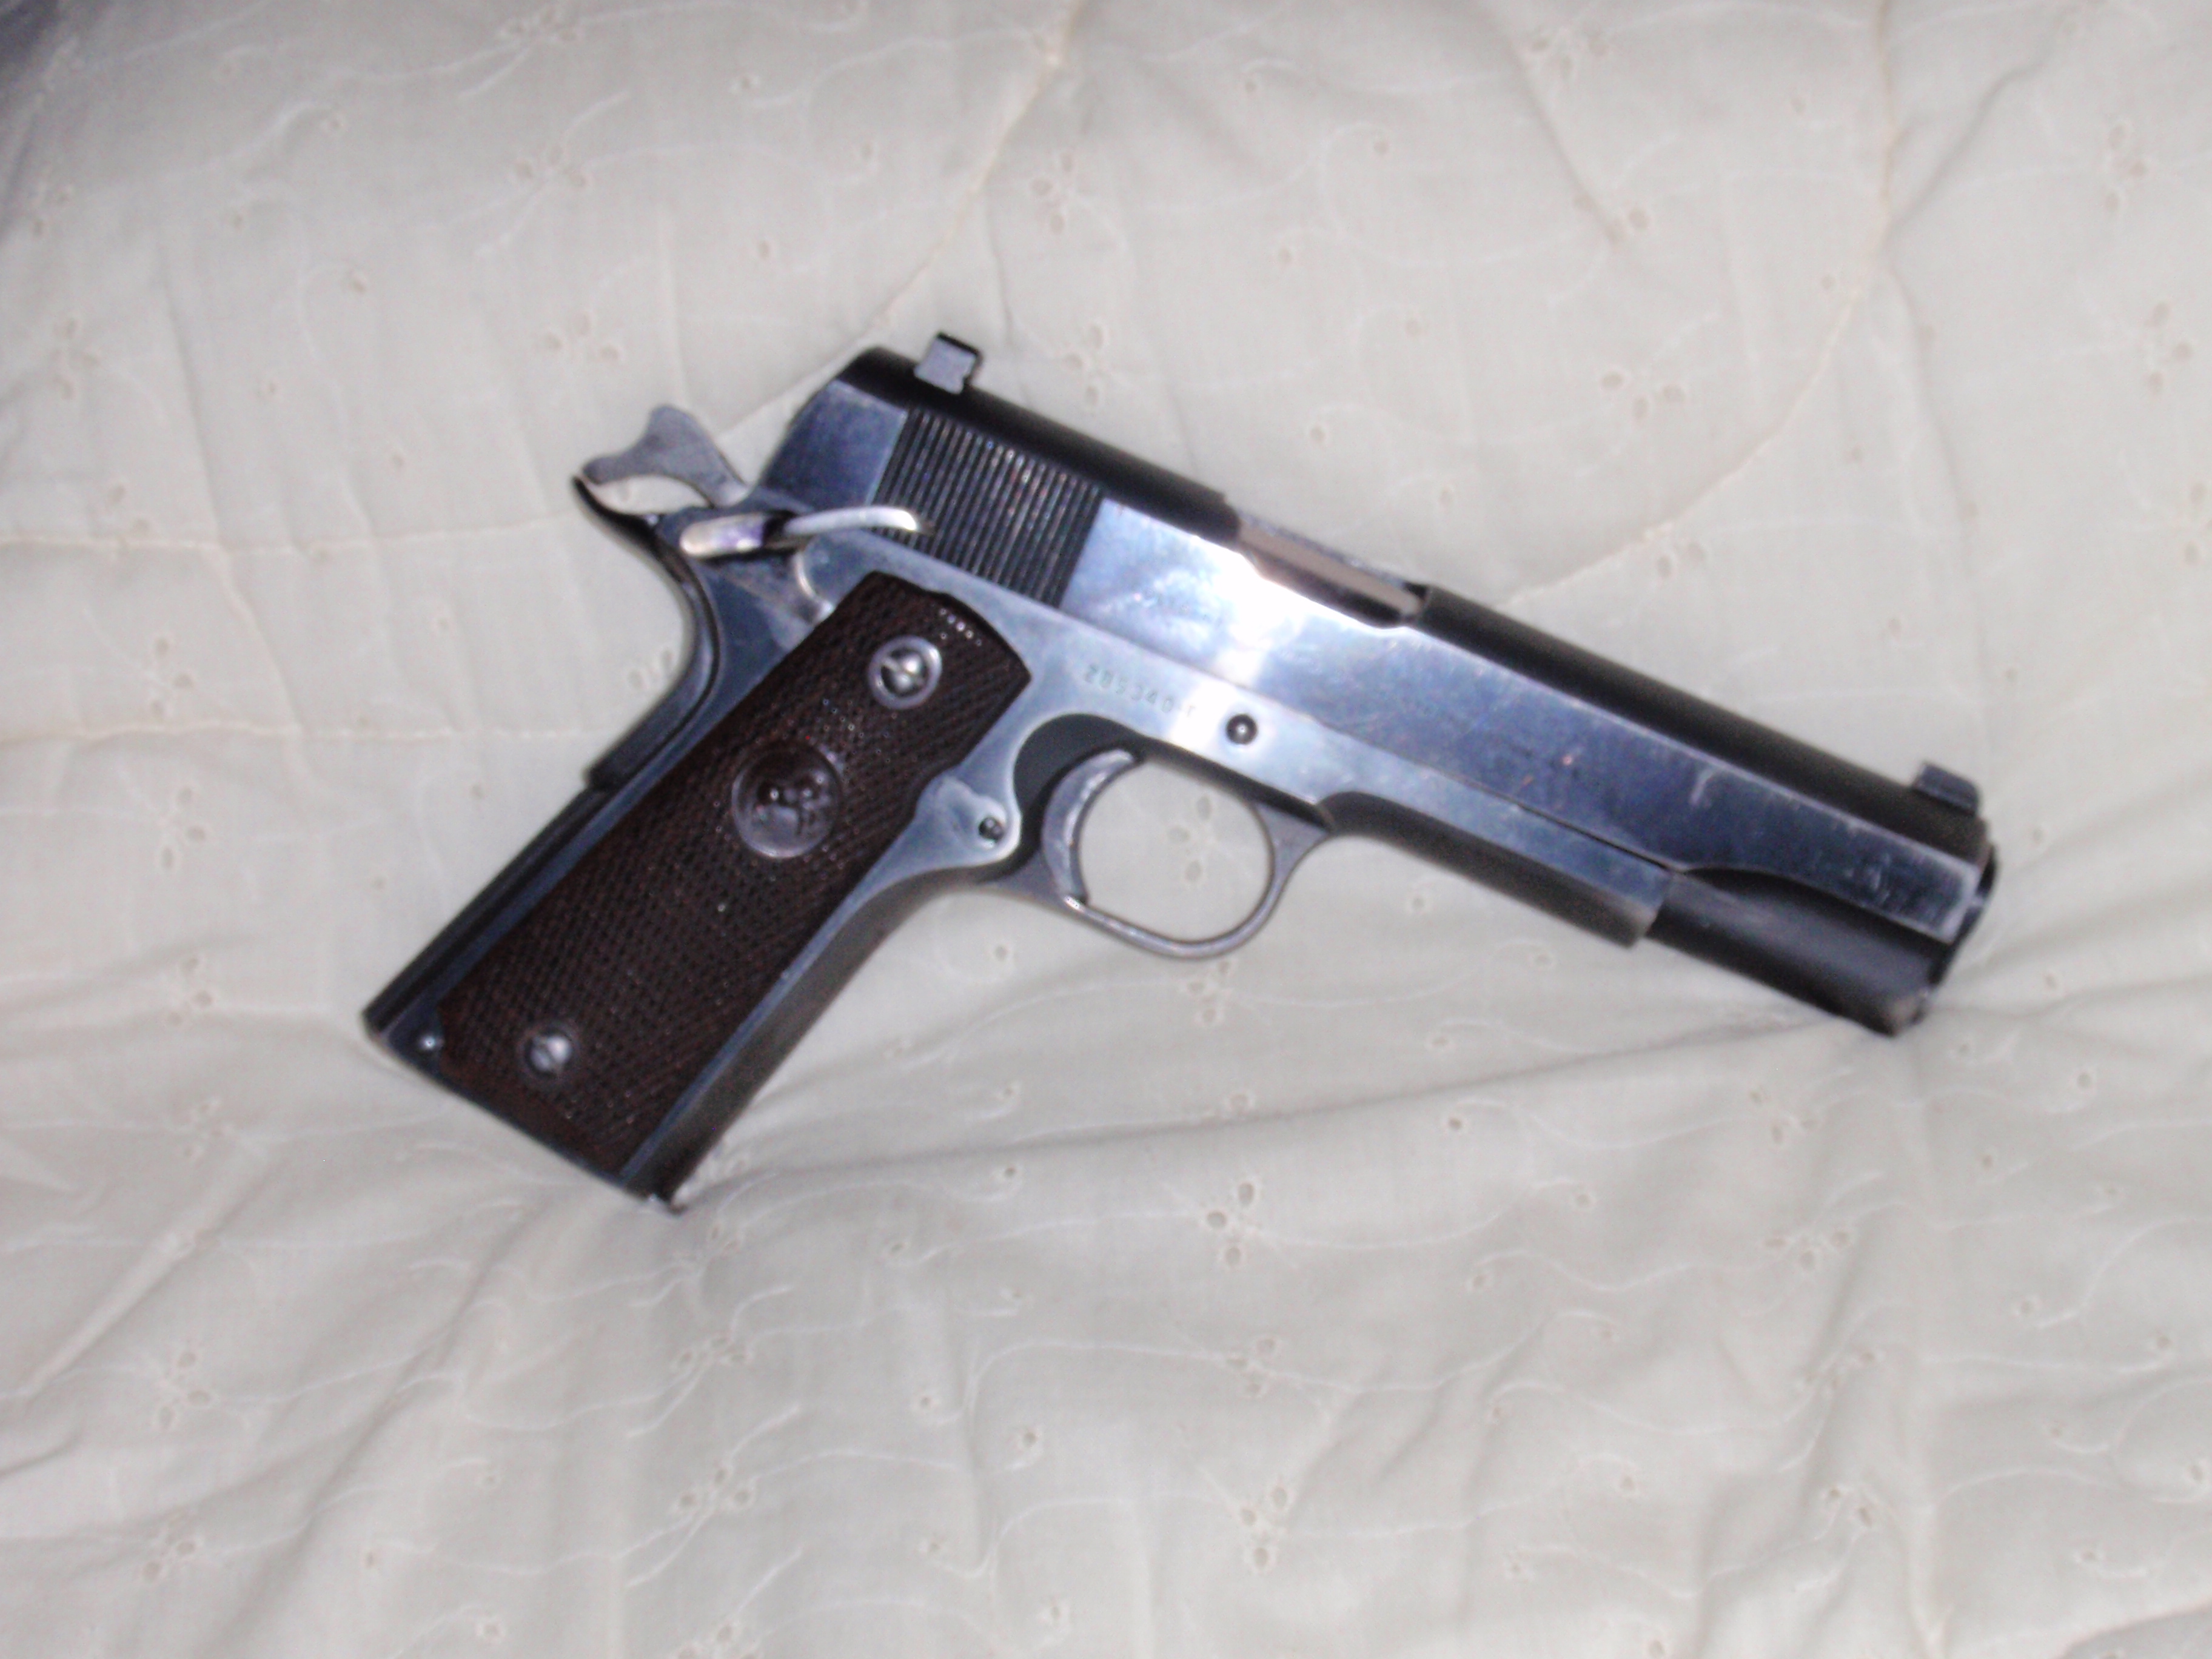 This is my 1911